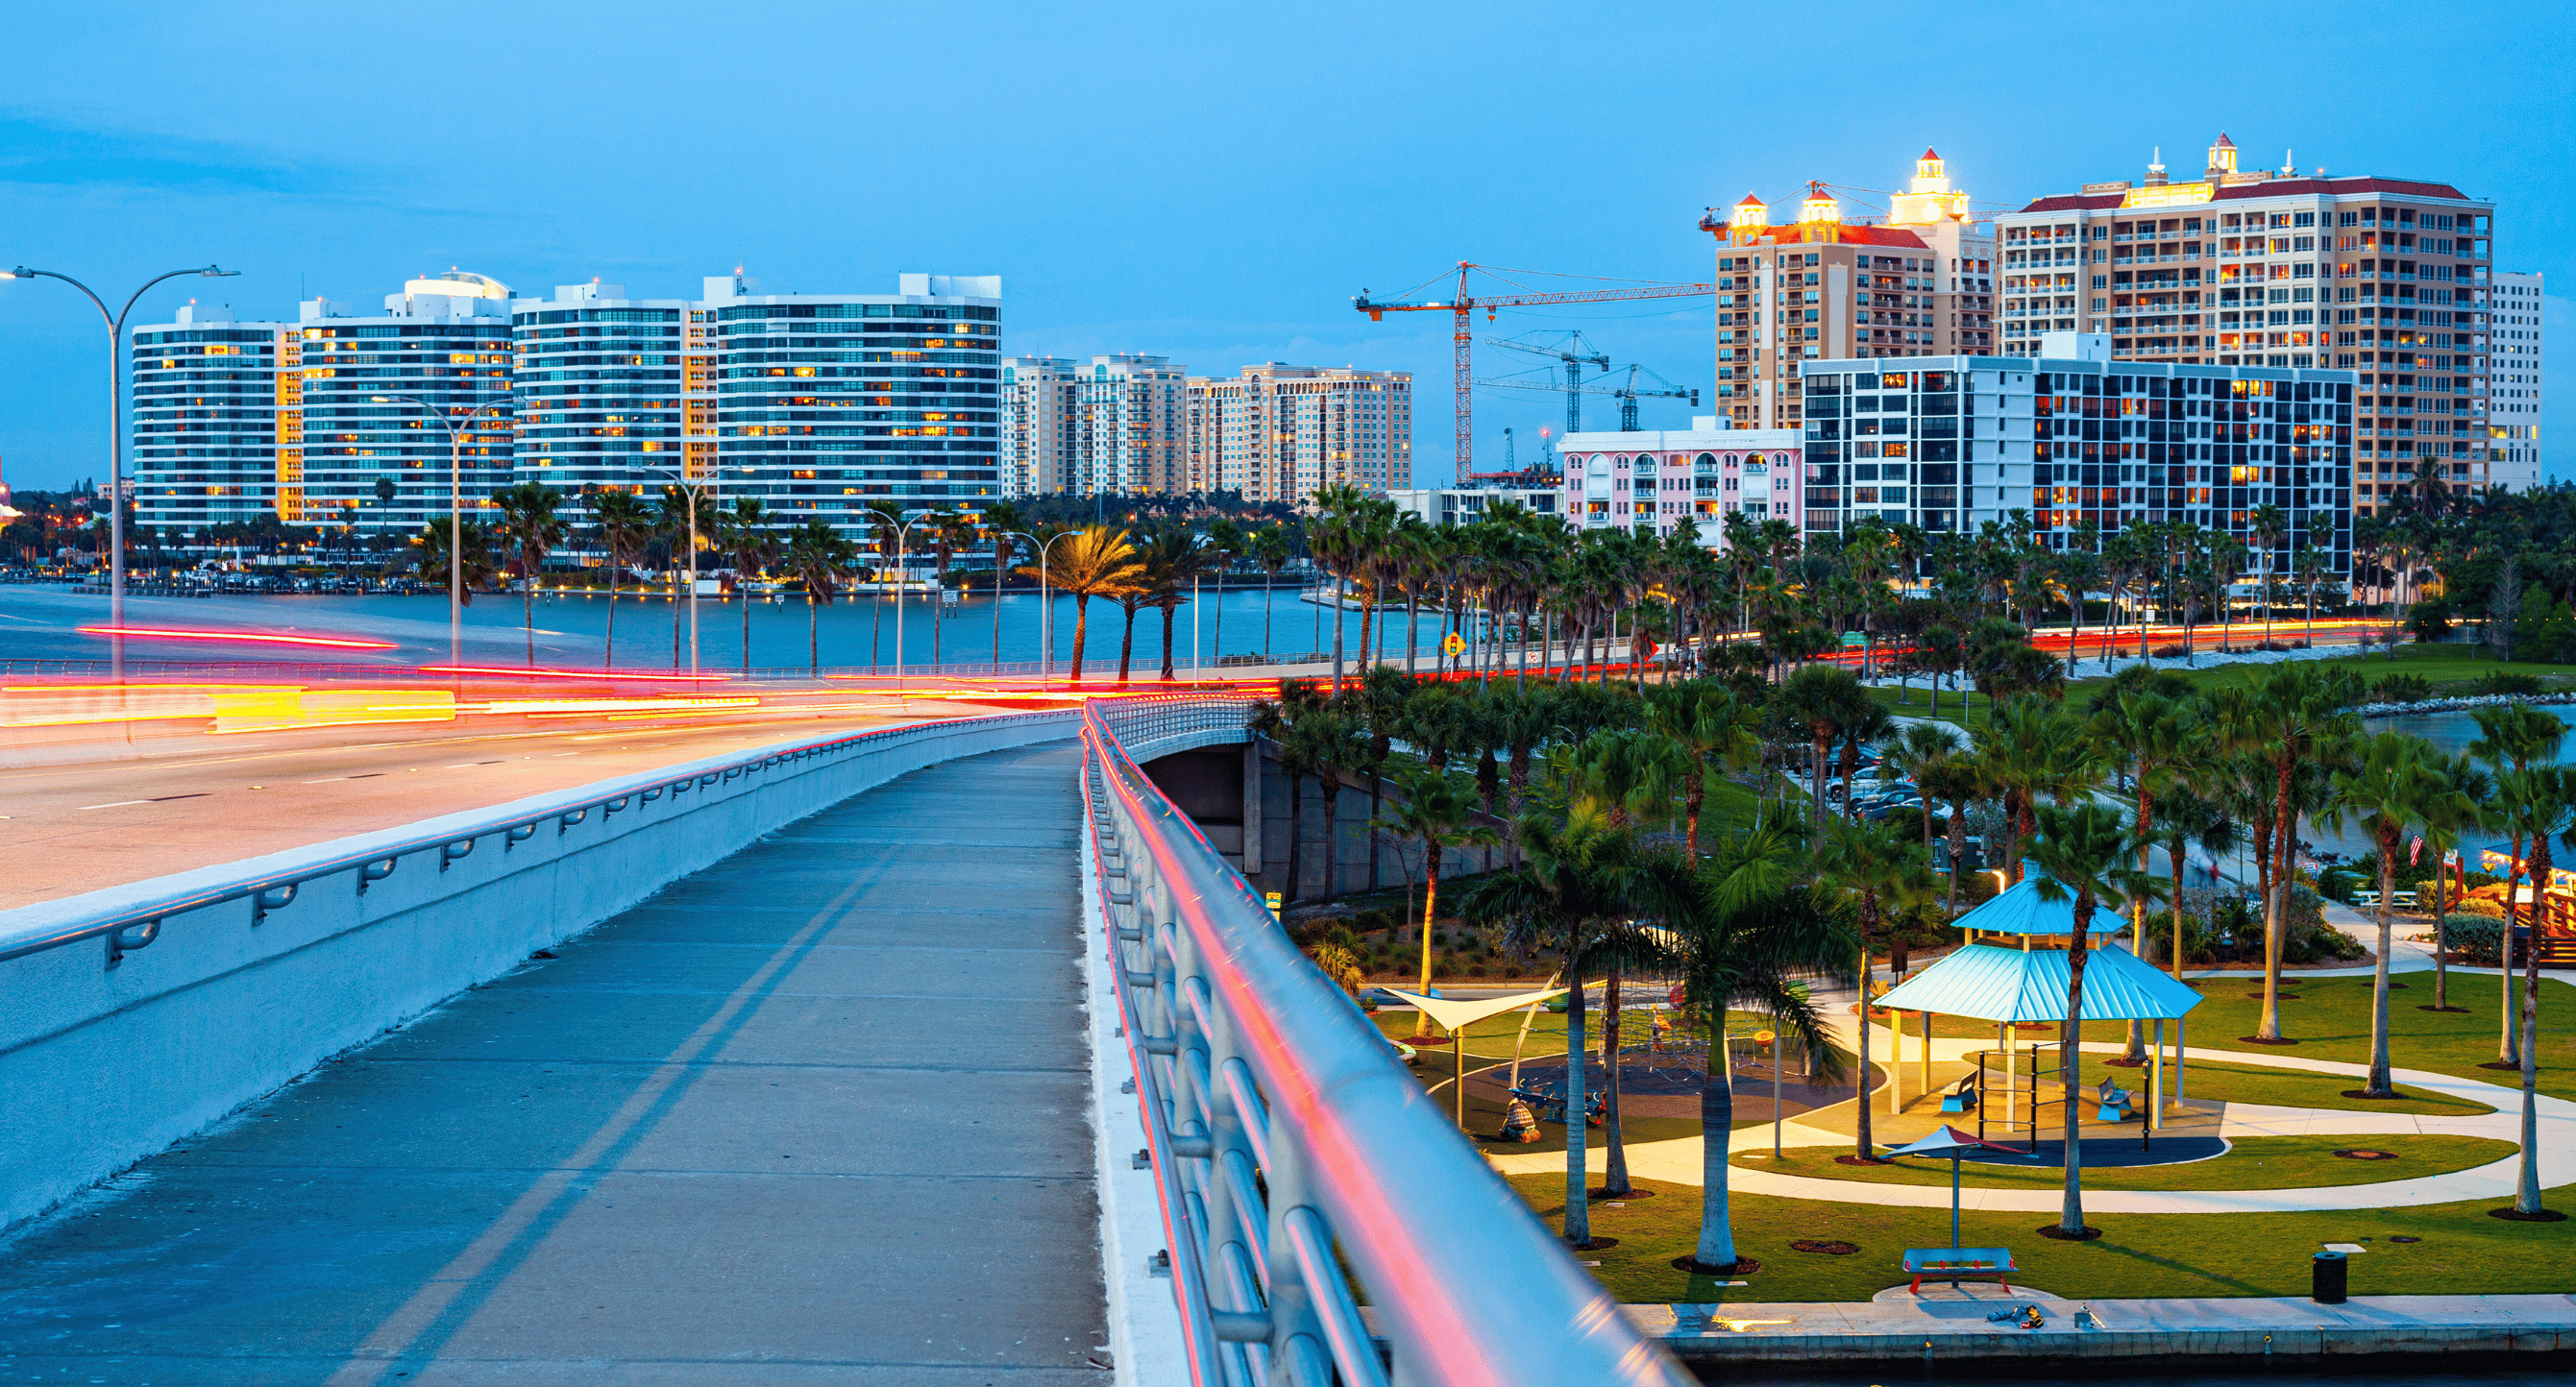 Sarasota, Florida is seeing a rapid transformation, from urban condo construction to sprawling new McMansions. 